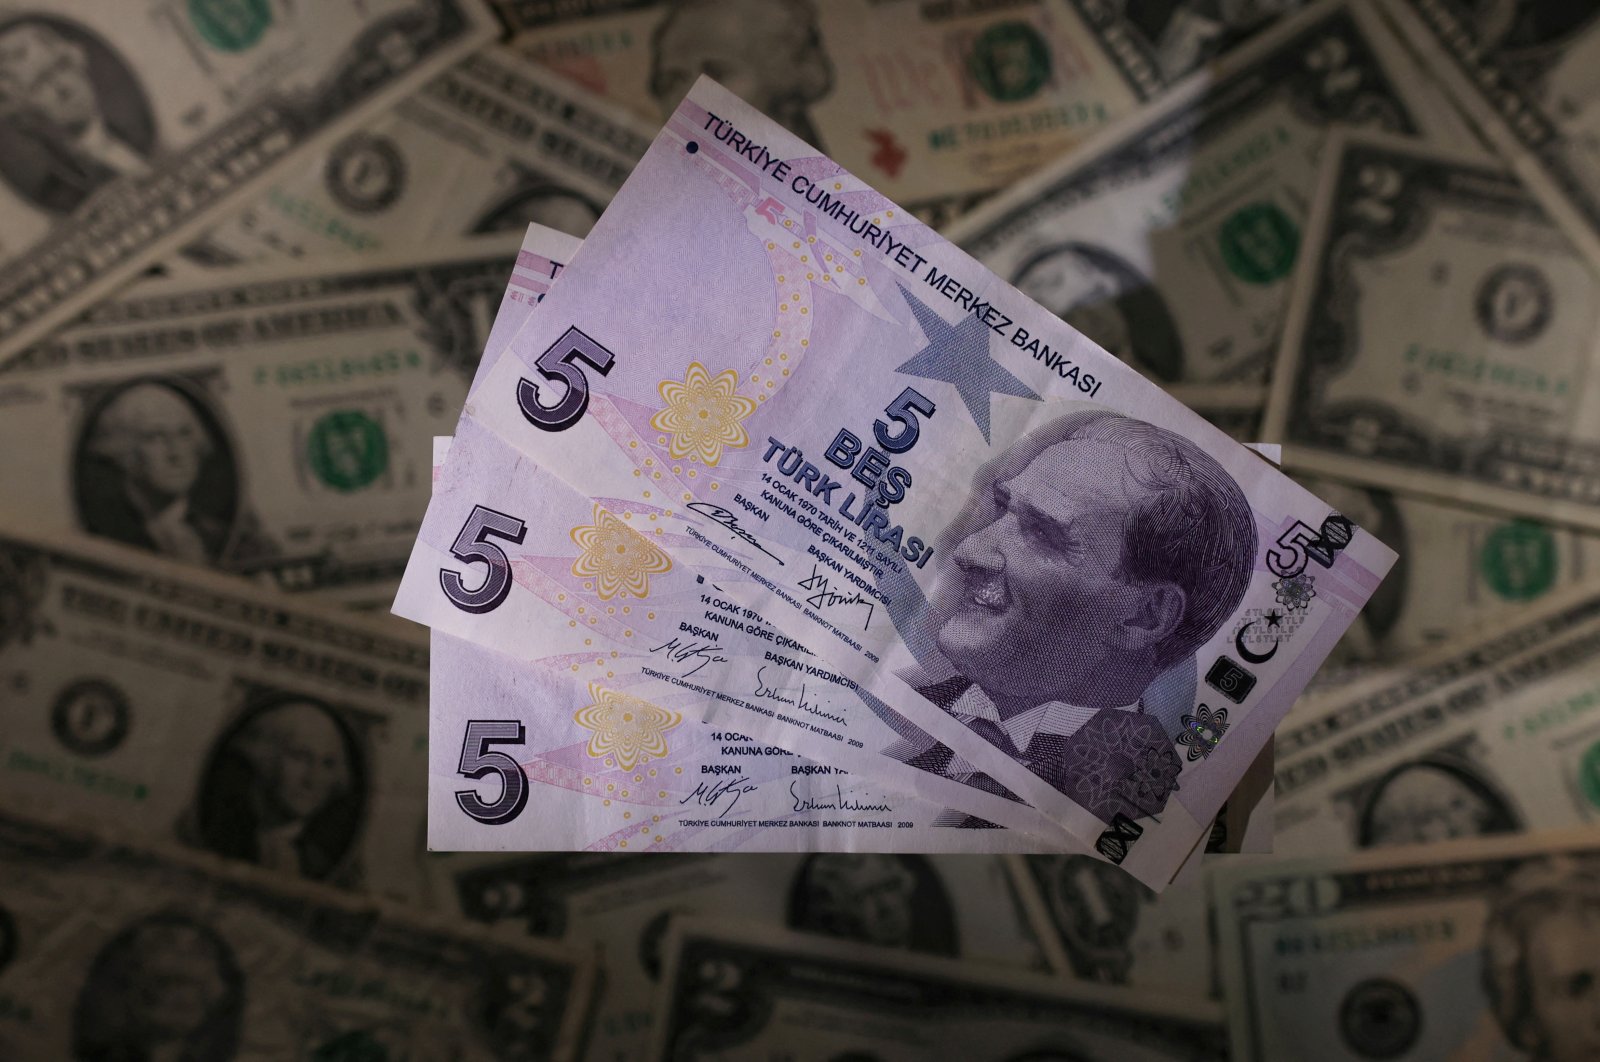 Turkish lira banknotes are seen placed on U.S. dollar banknotes in this illustration taken on Nov. 28, 2021. (Reuters Photo)